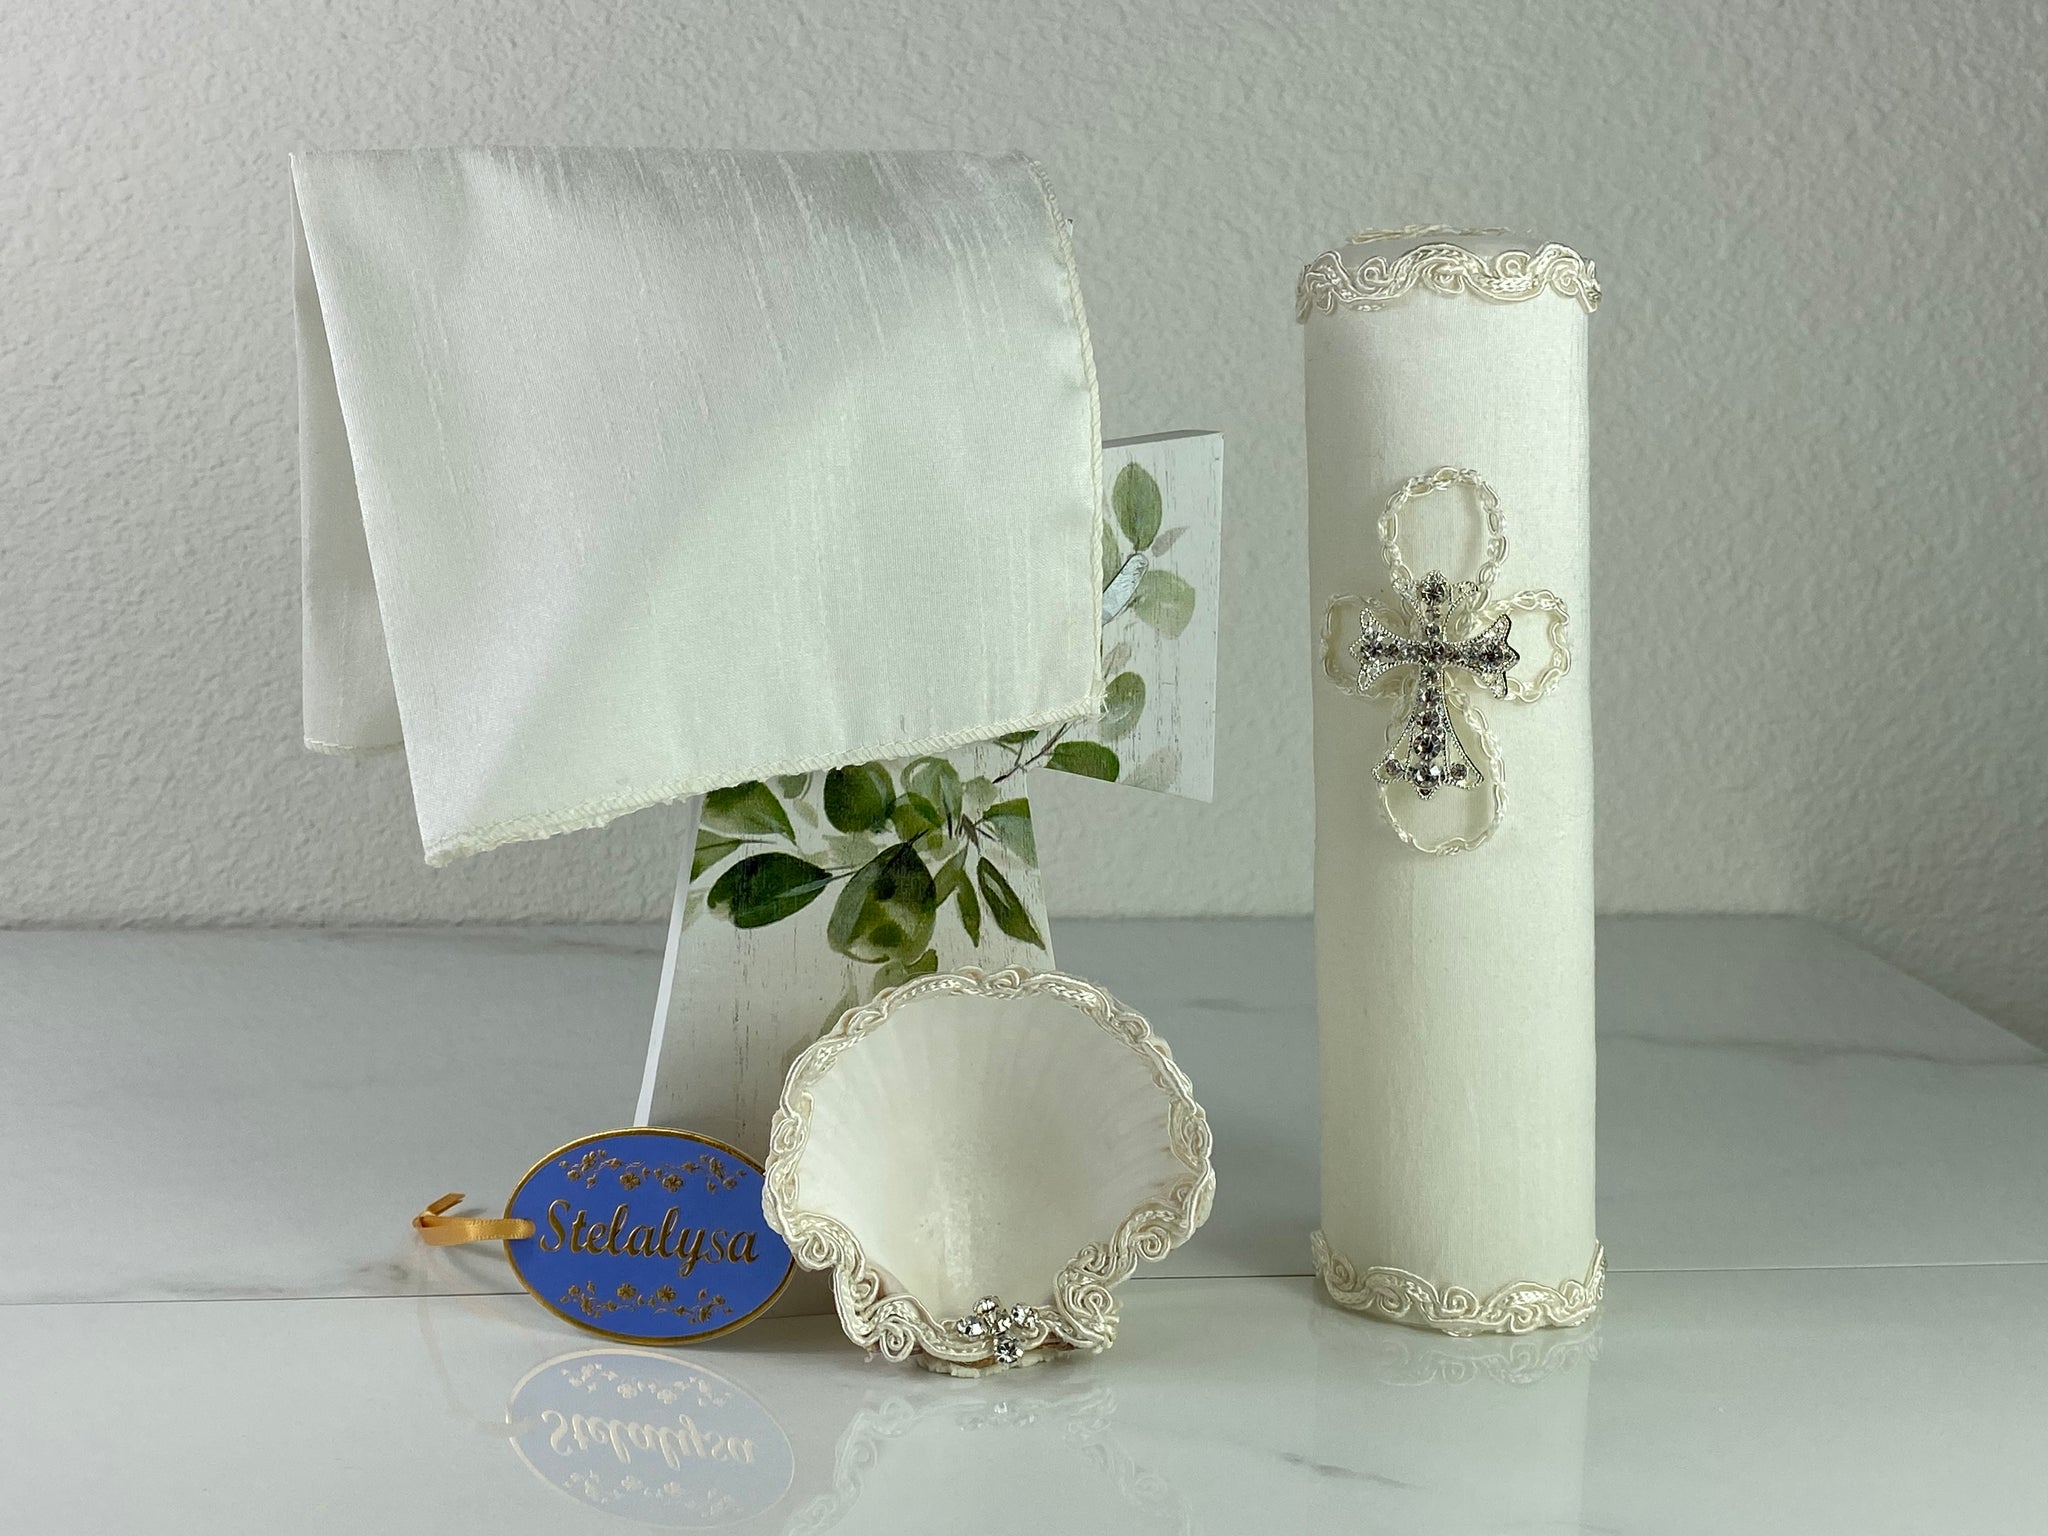 These one-of-a-kind Candle set is handmade and ivory in color.  This candle has a classic look.   It is elegantly decorated with lace and a cross made of crystals making it a gorgeous keepsake.   This candle is cylinder in shape.  To match, the Shell is put together piece by piece to compliment the Candle and Handkerchief.  The Handkerchief is made of satin and embroidered lace to match the Shell and Candle beautifully.  